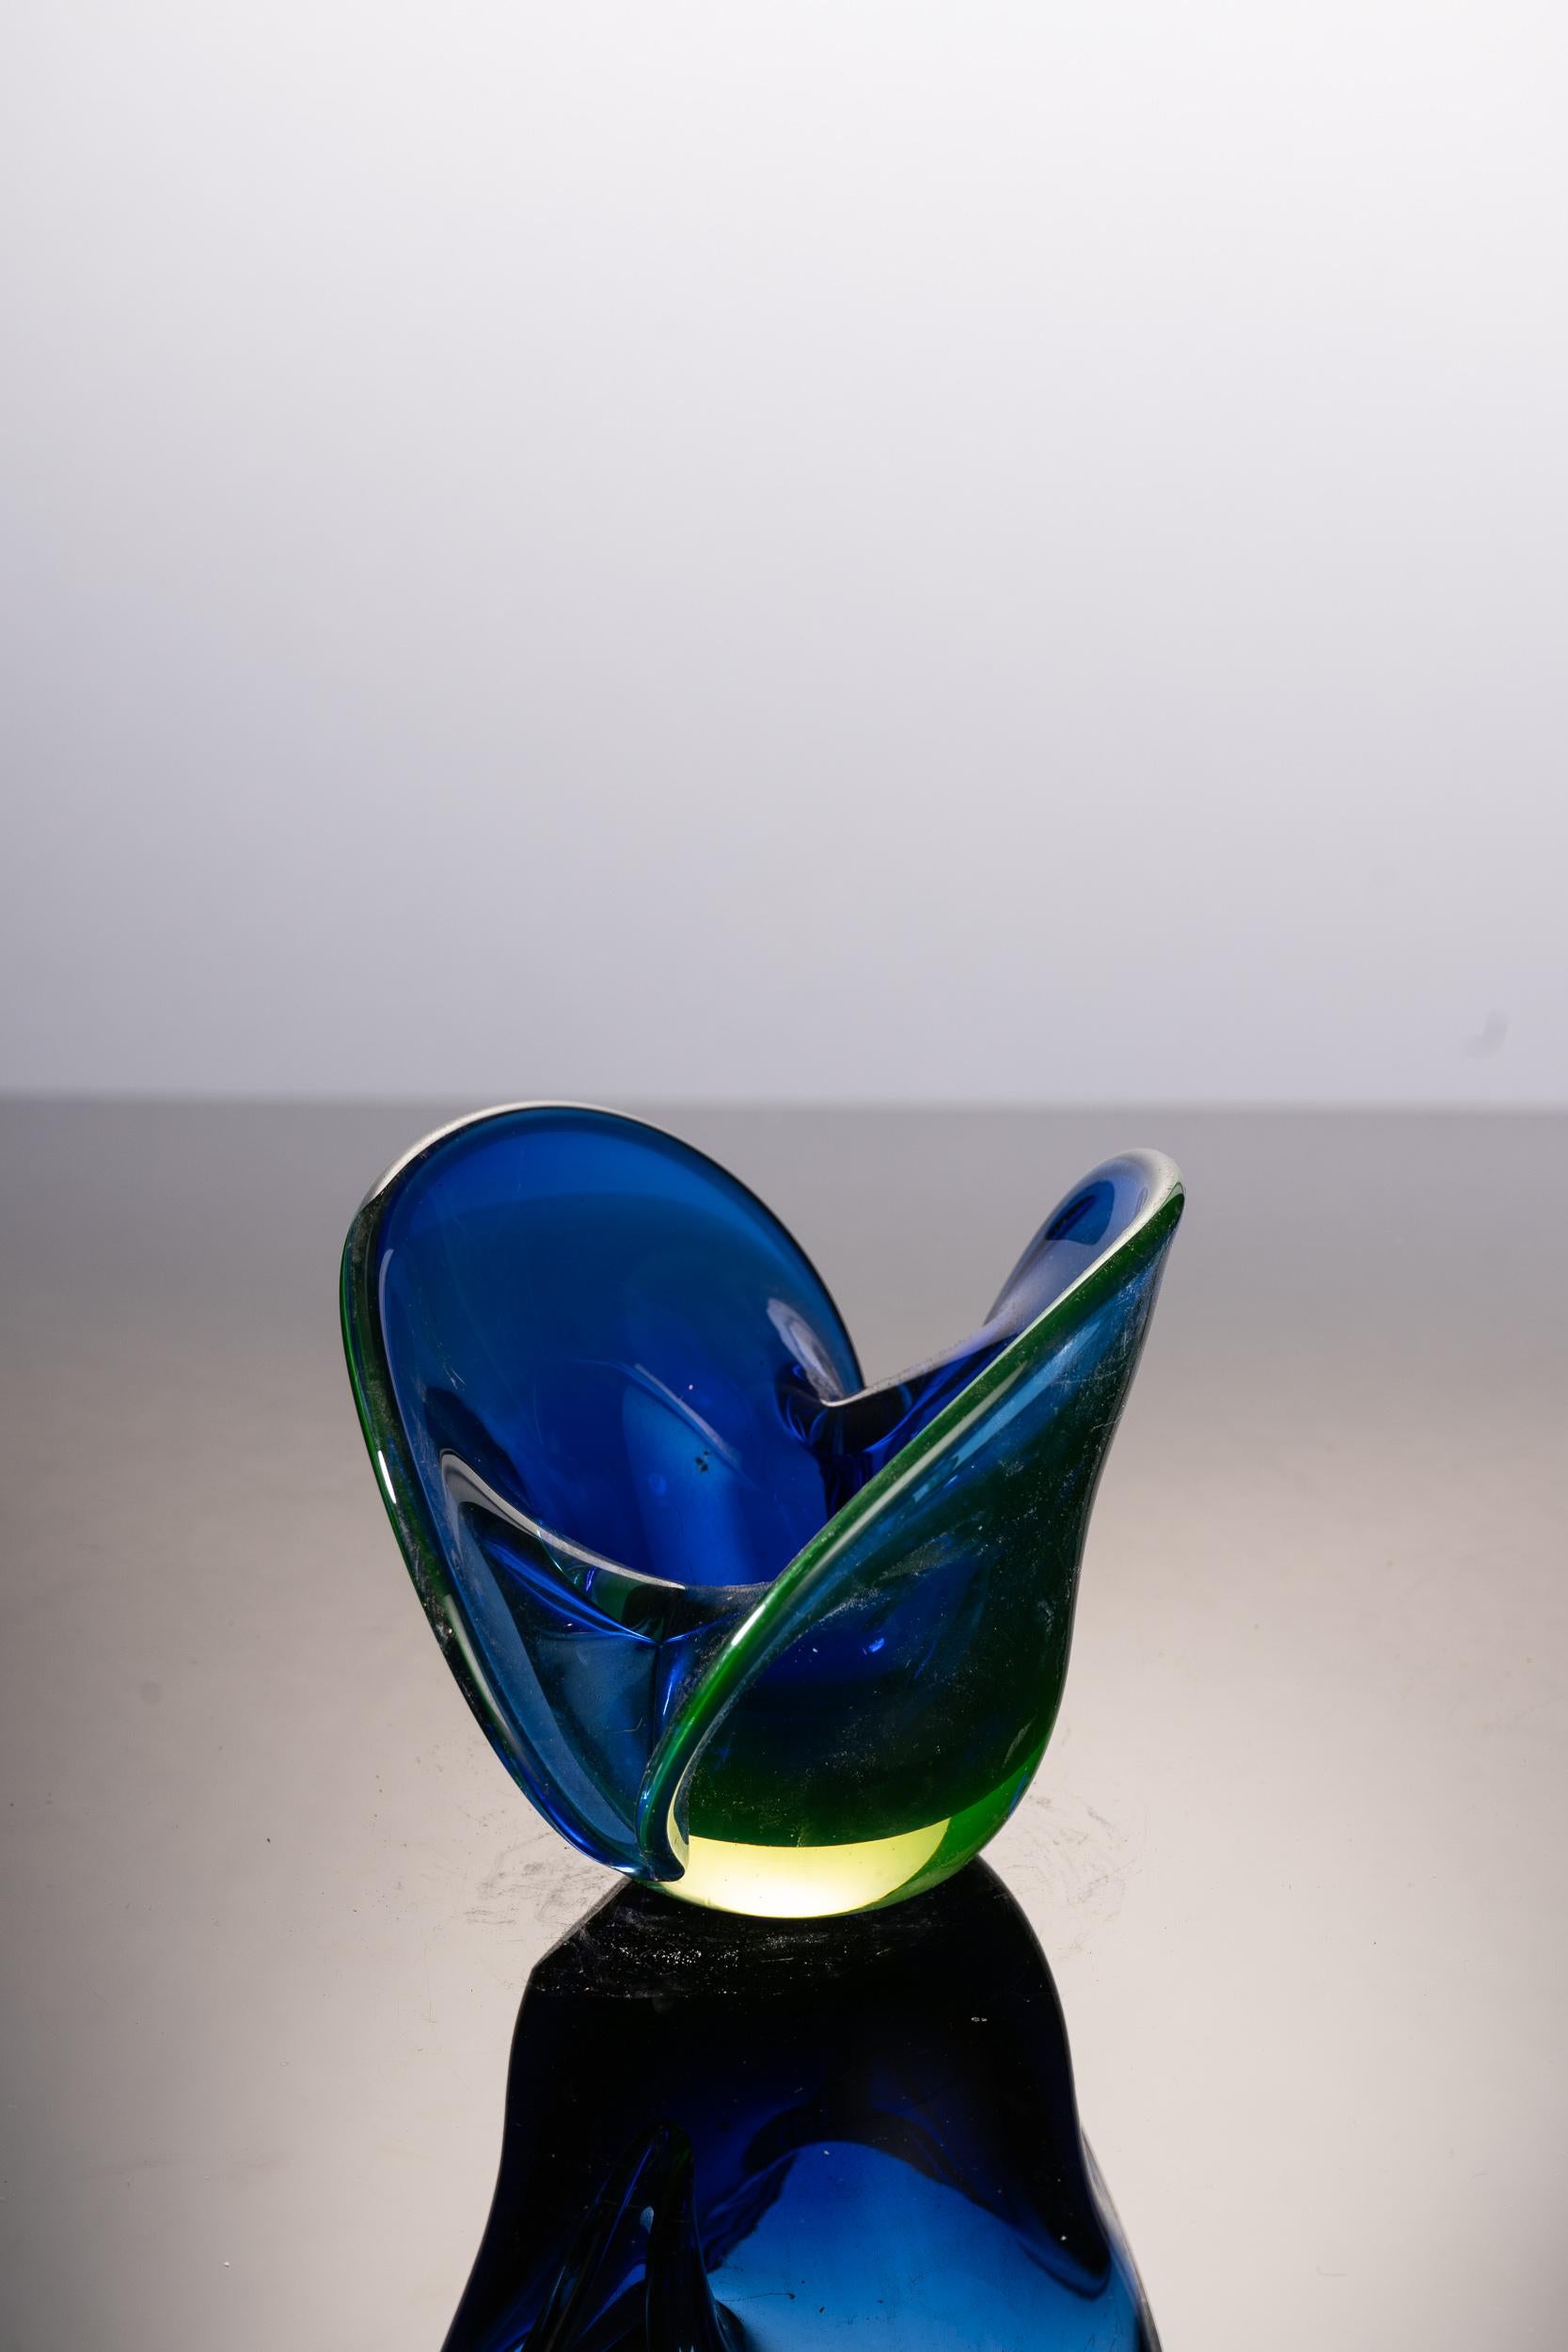 Very original deep blue Murano glass vase with a rounded design and a split top. The base and edges of this rare item have a light green tint.